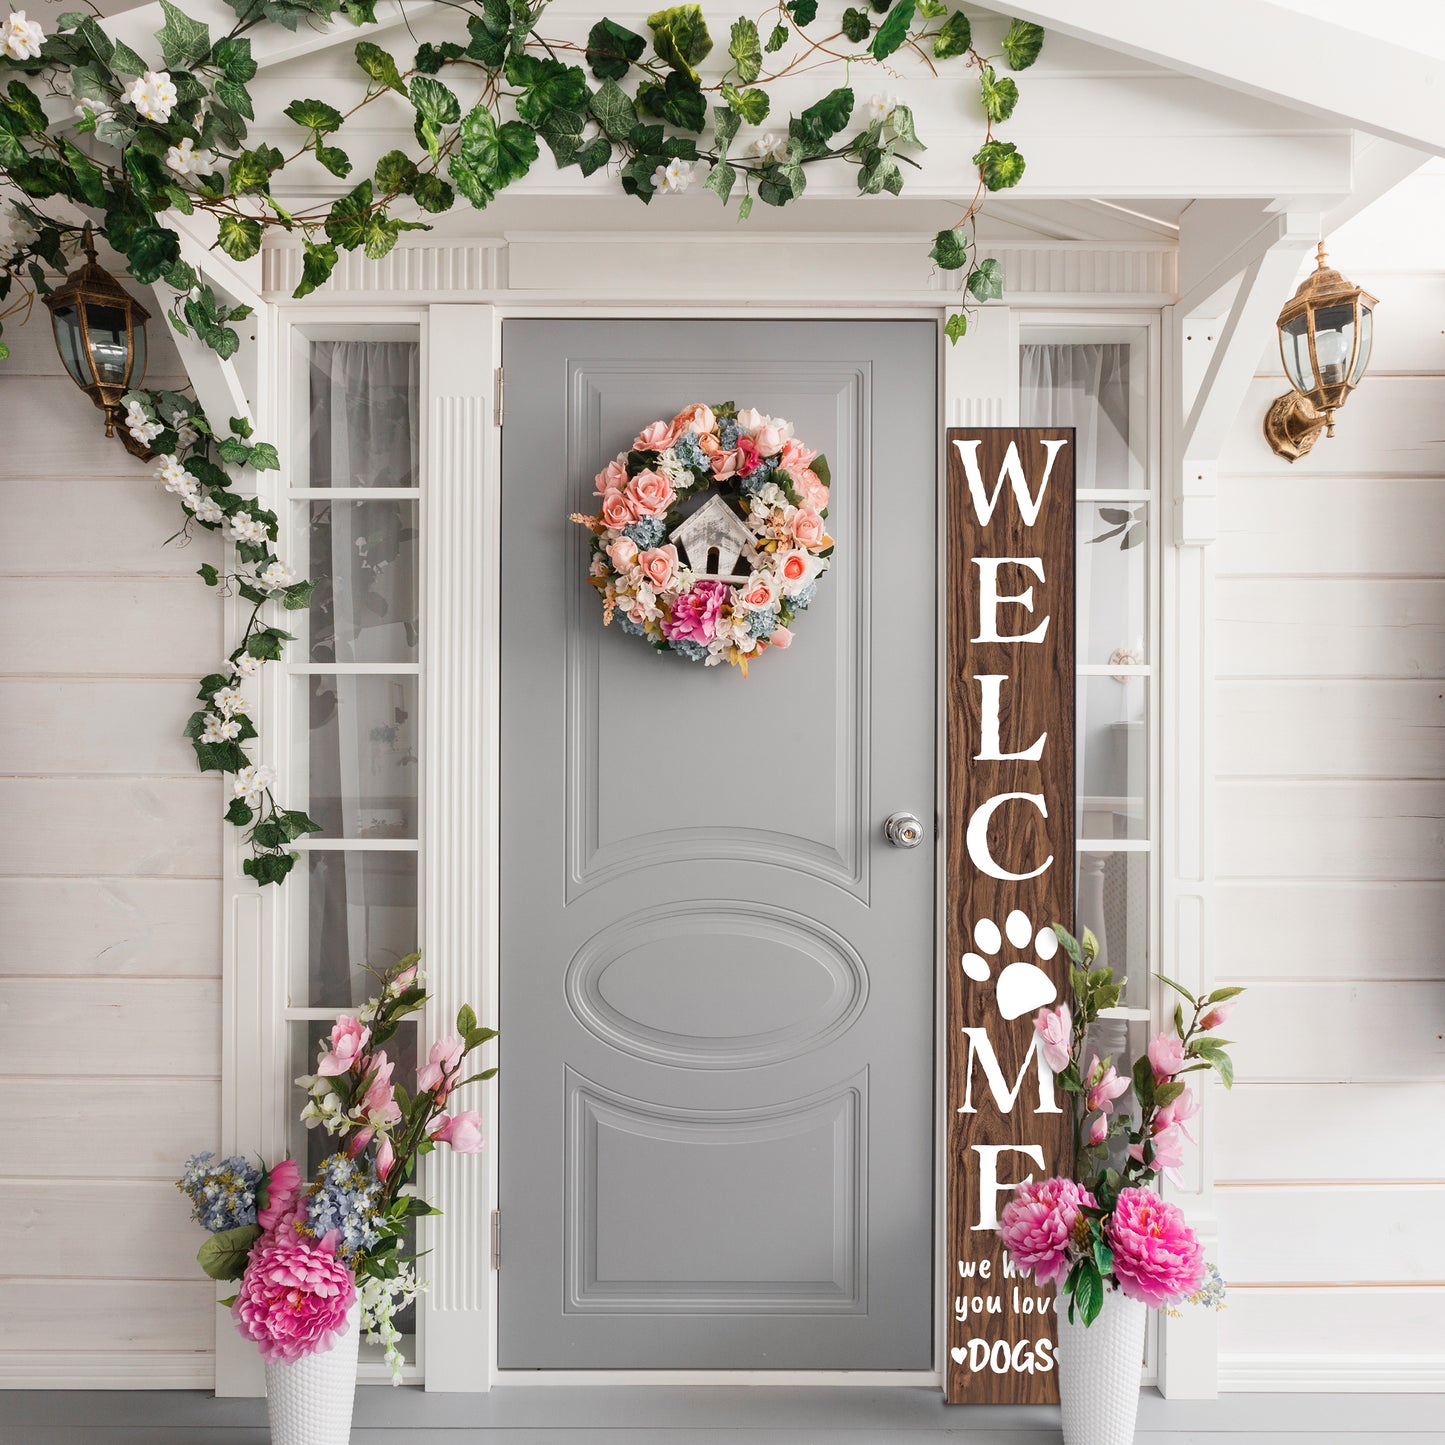 72in 'We Hope You Love Dogs' Brown Porch Sign - Dog Lover Welcome Home Sign, Ideal for Dog House Decor, Perfect Everyday Porch Decor